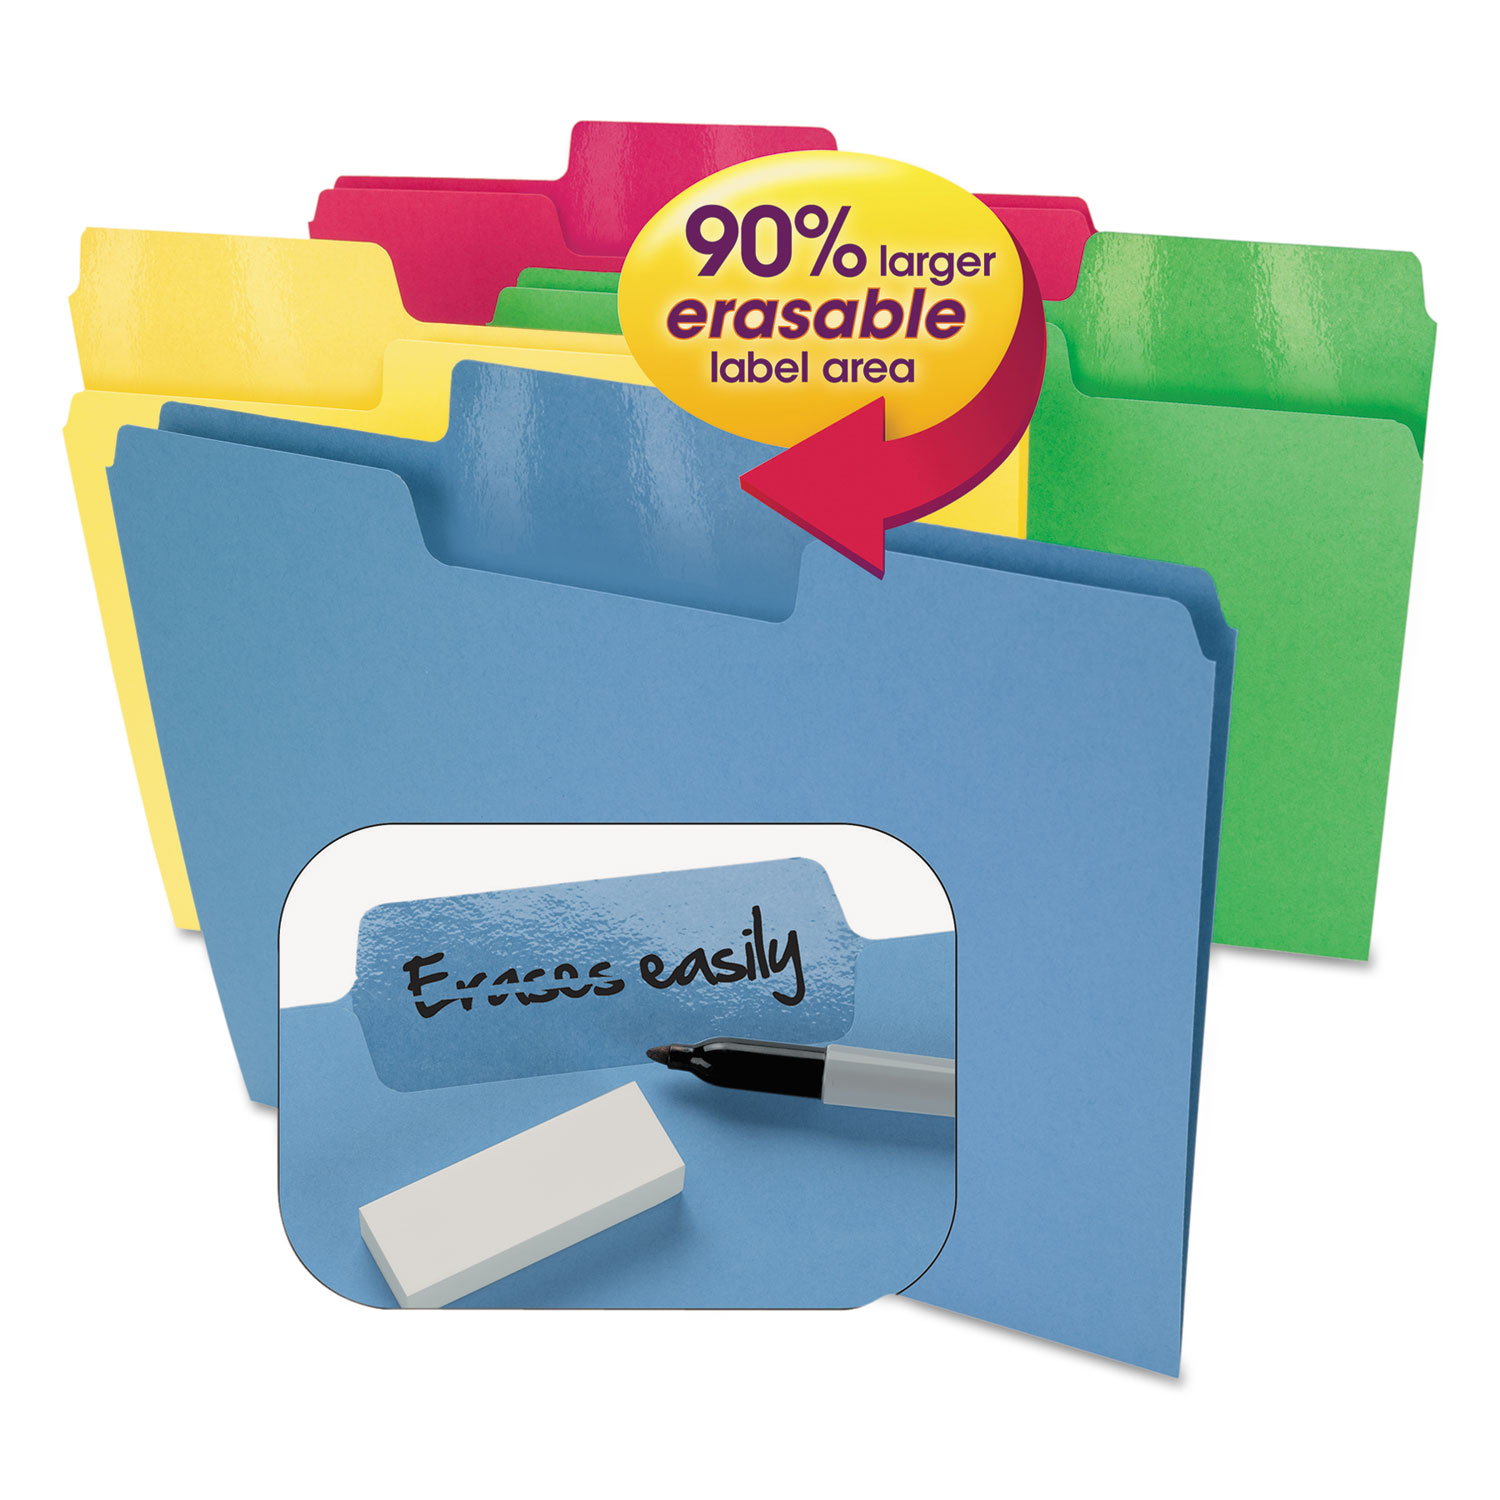  Smead 10480 Erasable SuperTab File Folders, 1/3-Cut Tabs, Letter Size, Assorted, 24/Pack (SMD10480) 